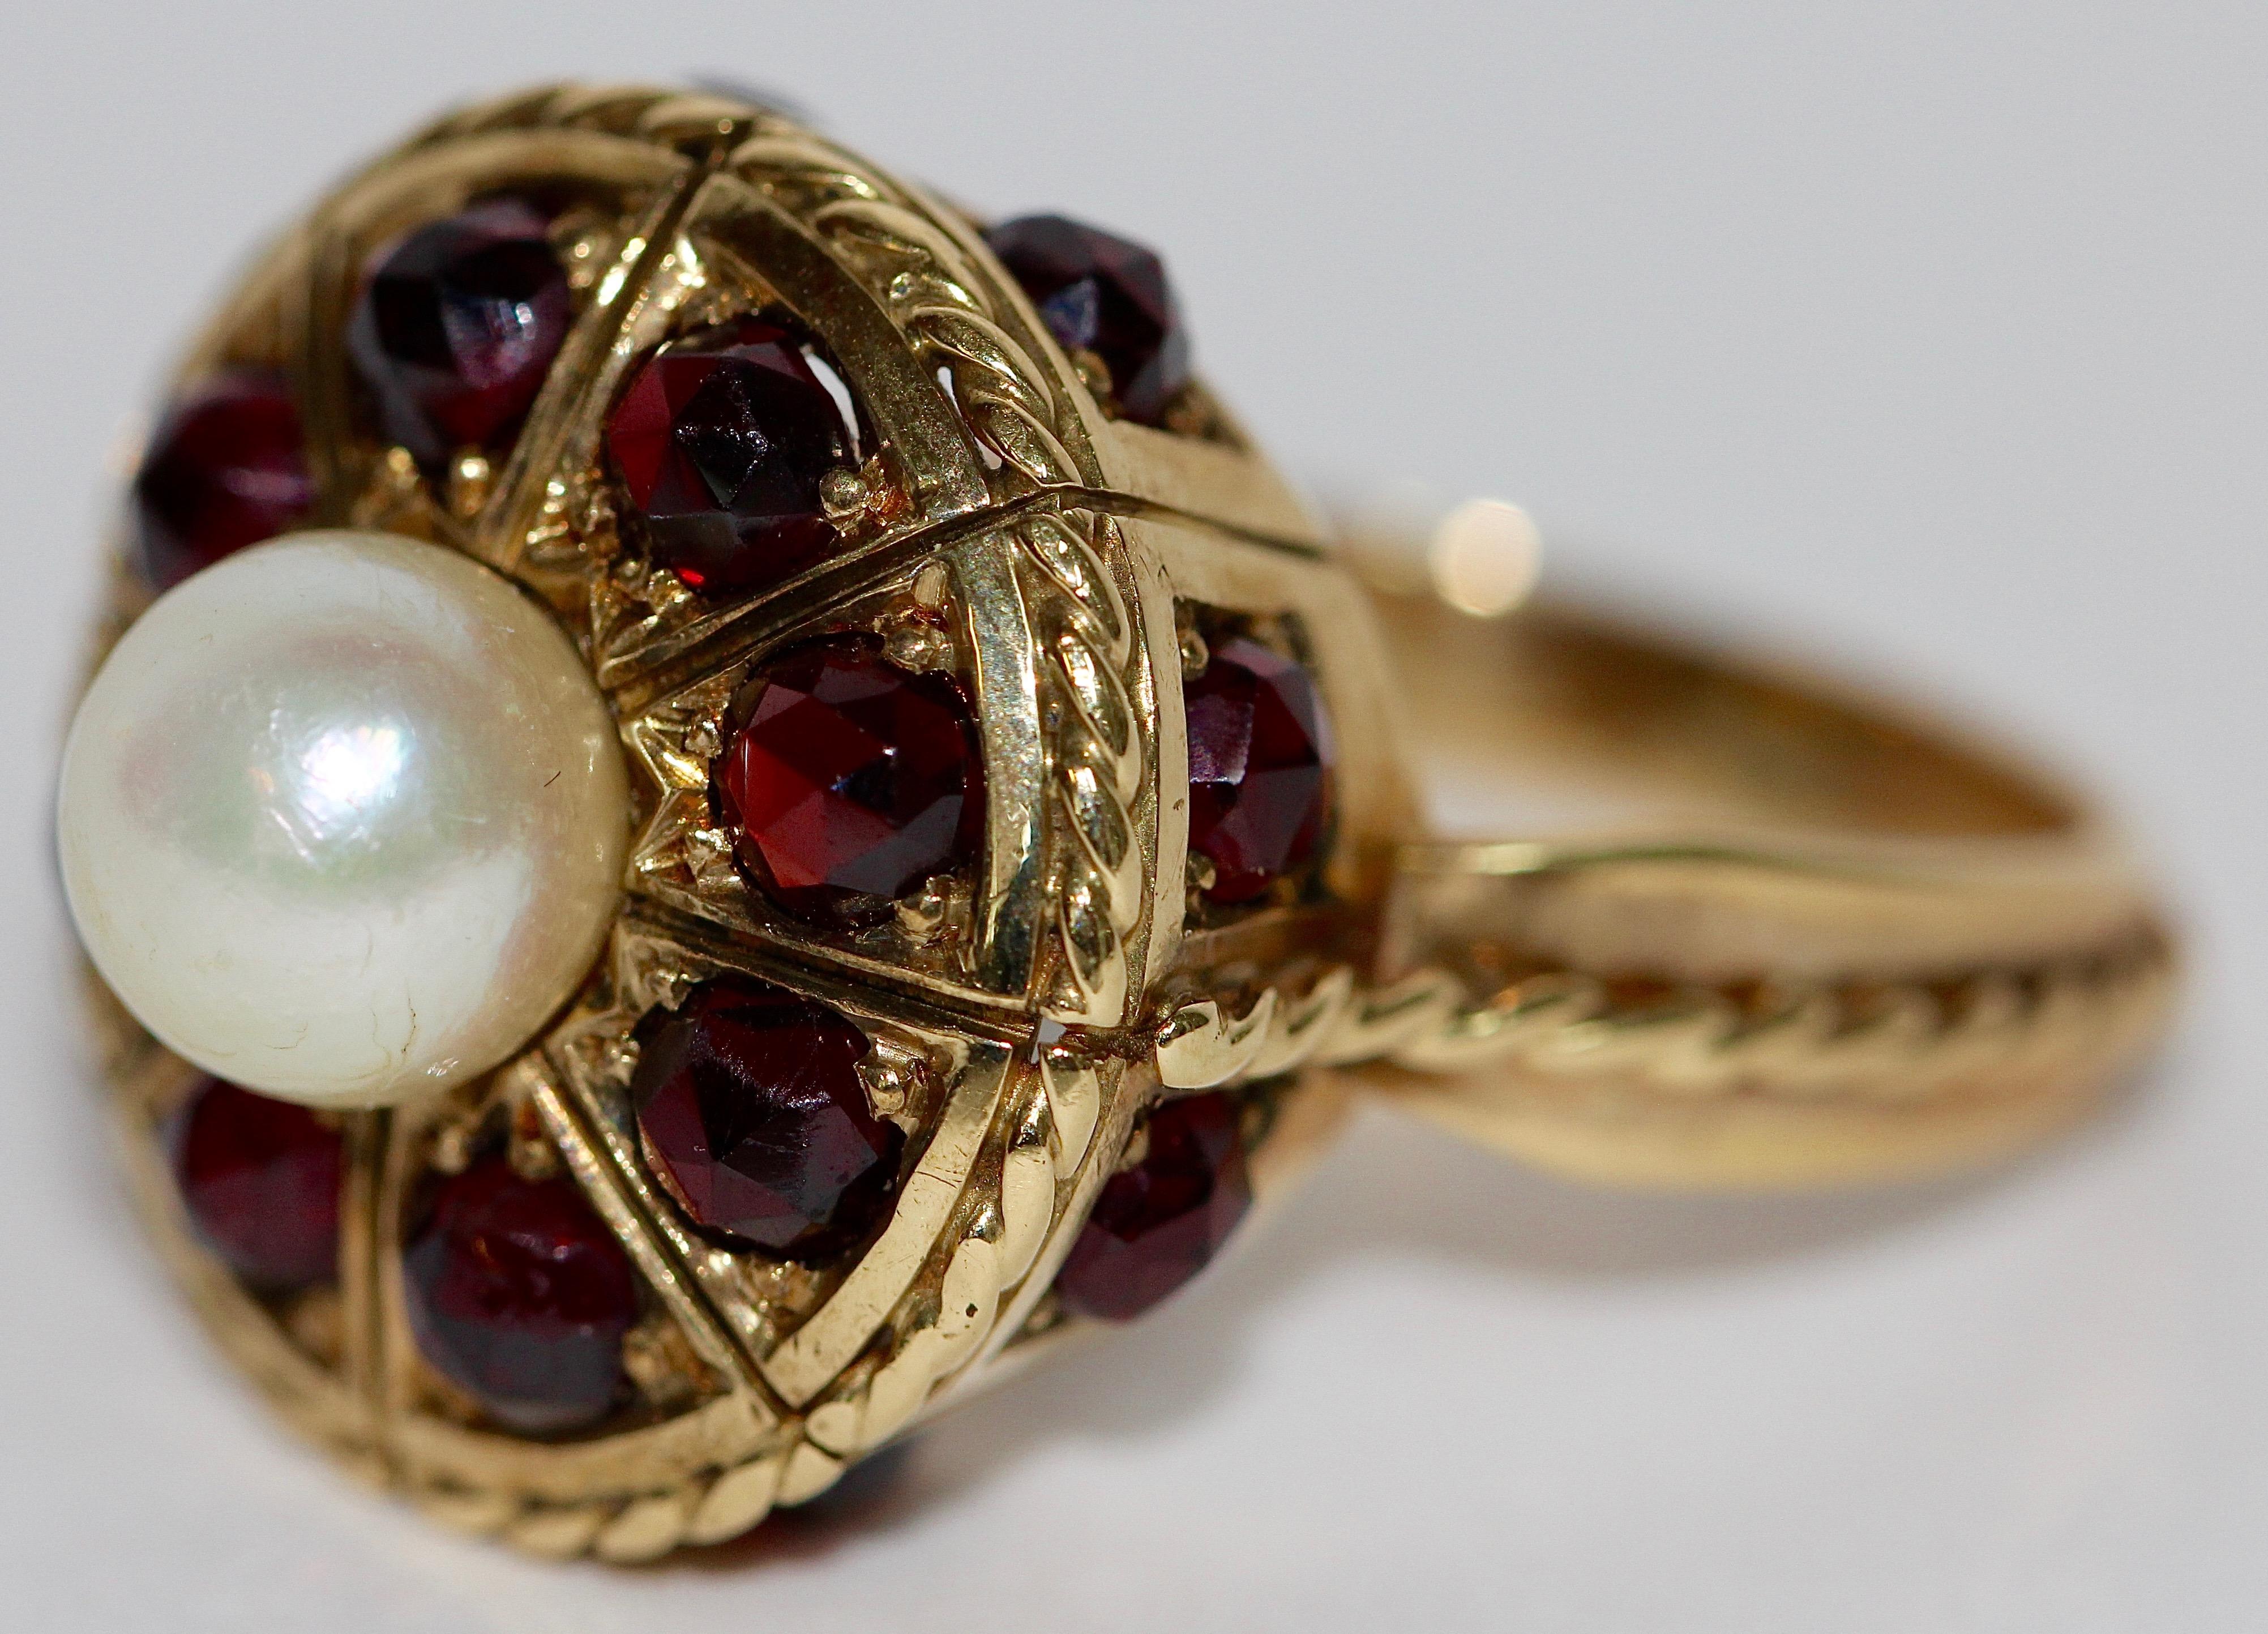 14k yellow gold ring set with many garnets and a large pearl.
Ring size (diameter) 18.5mm.